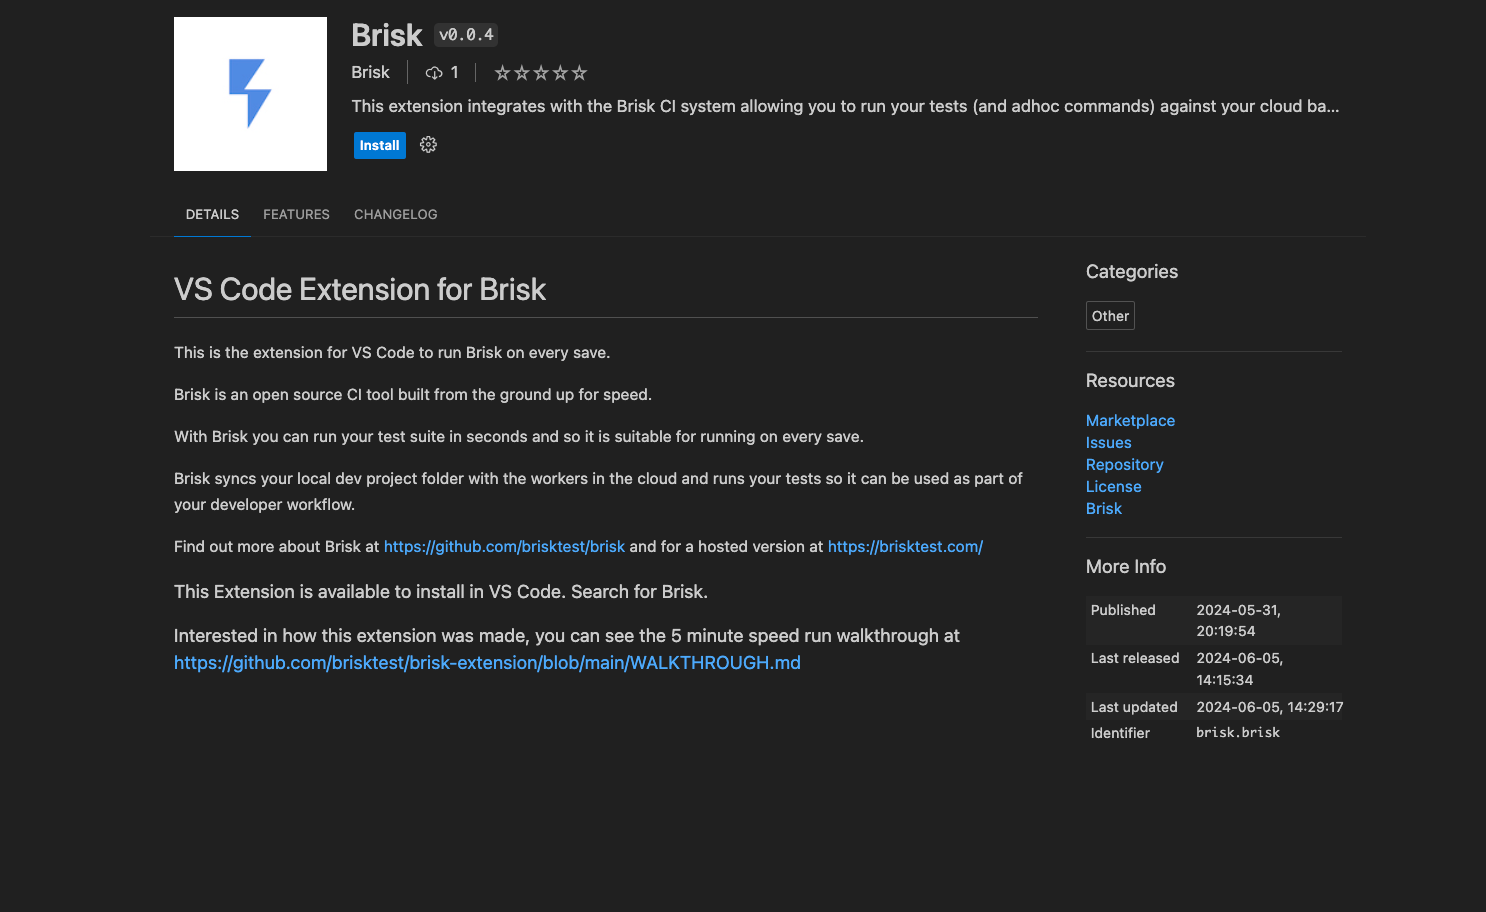 Announcing the Brisk VS Code extension